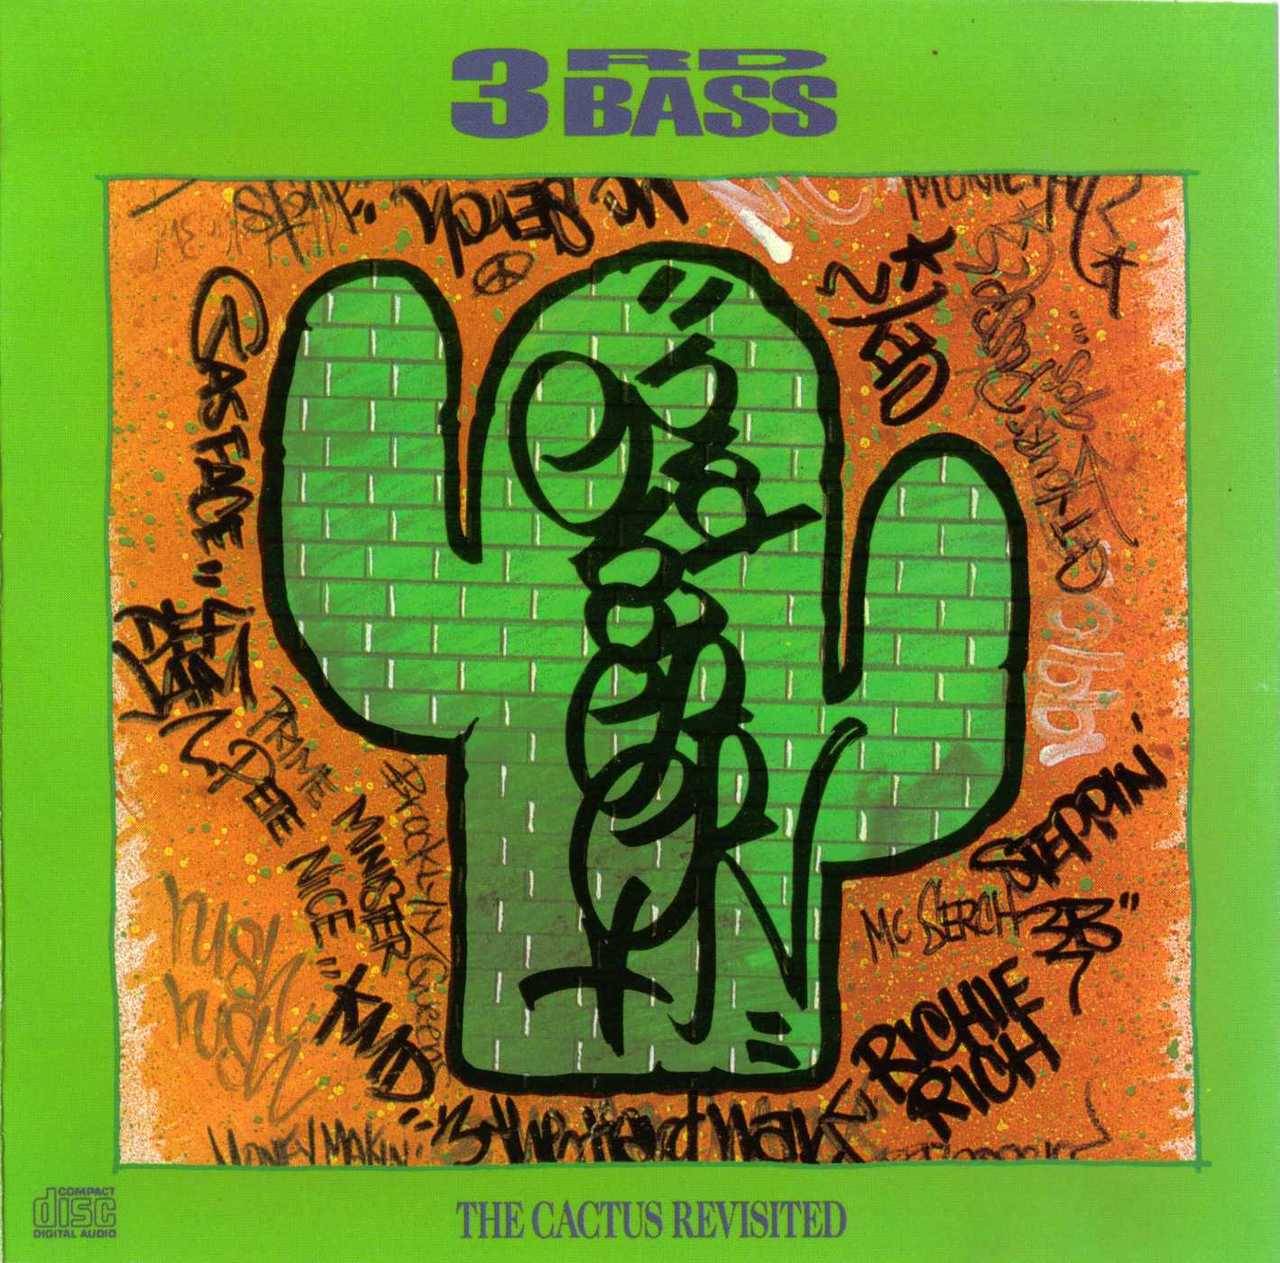 BACK IN THE DAY |9/7/90| 3rd Bass released the remix album, The Cactus Revisited,